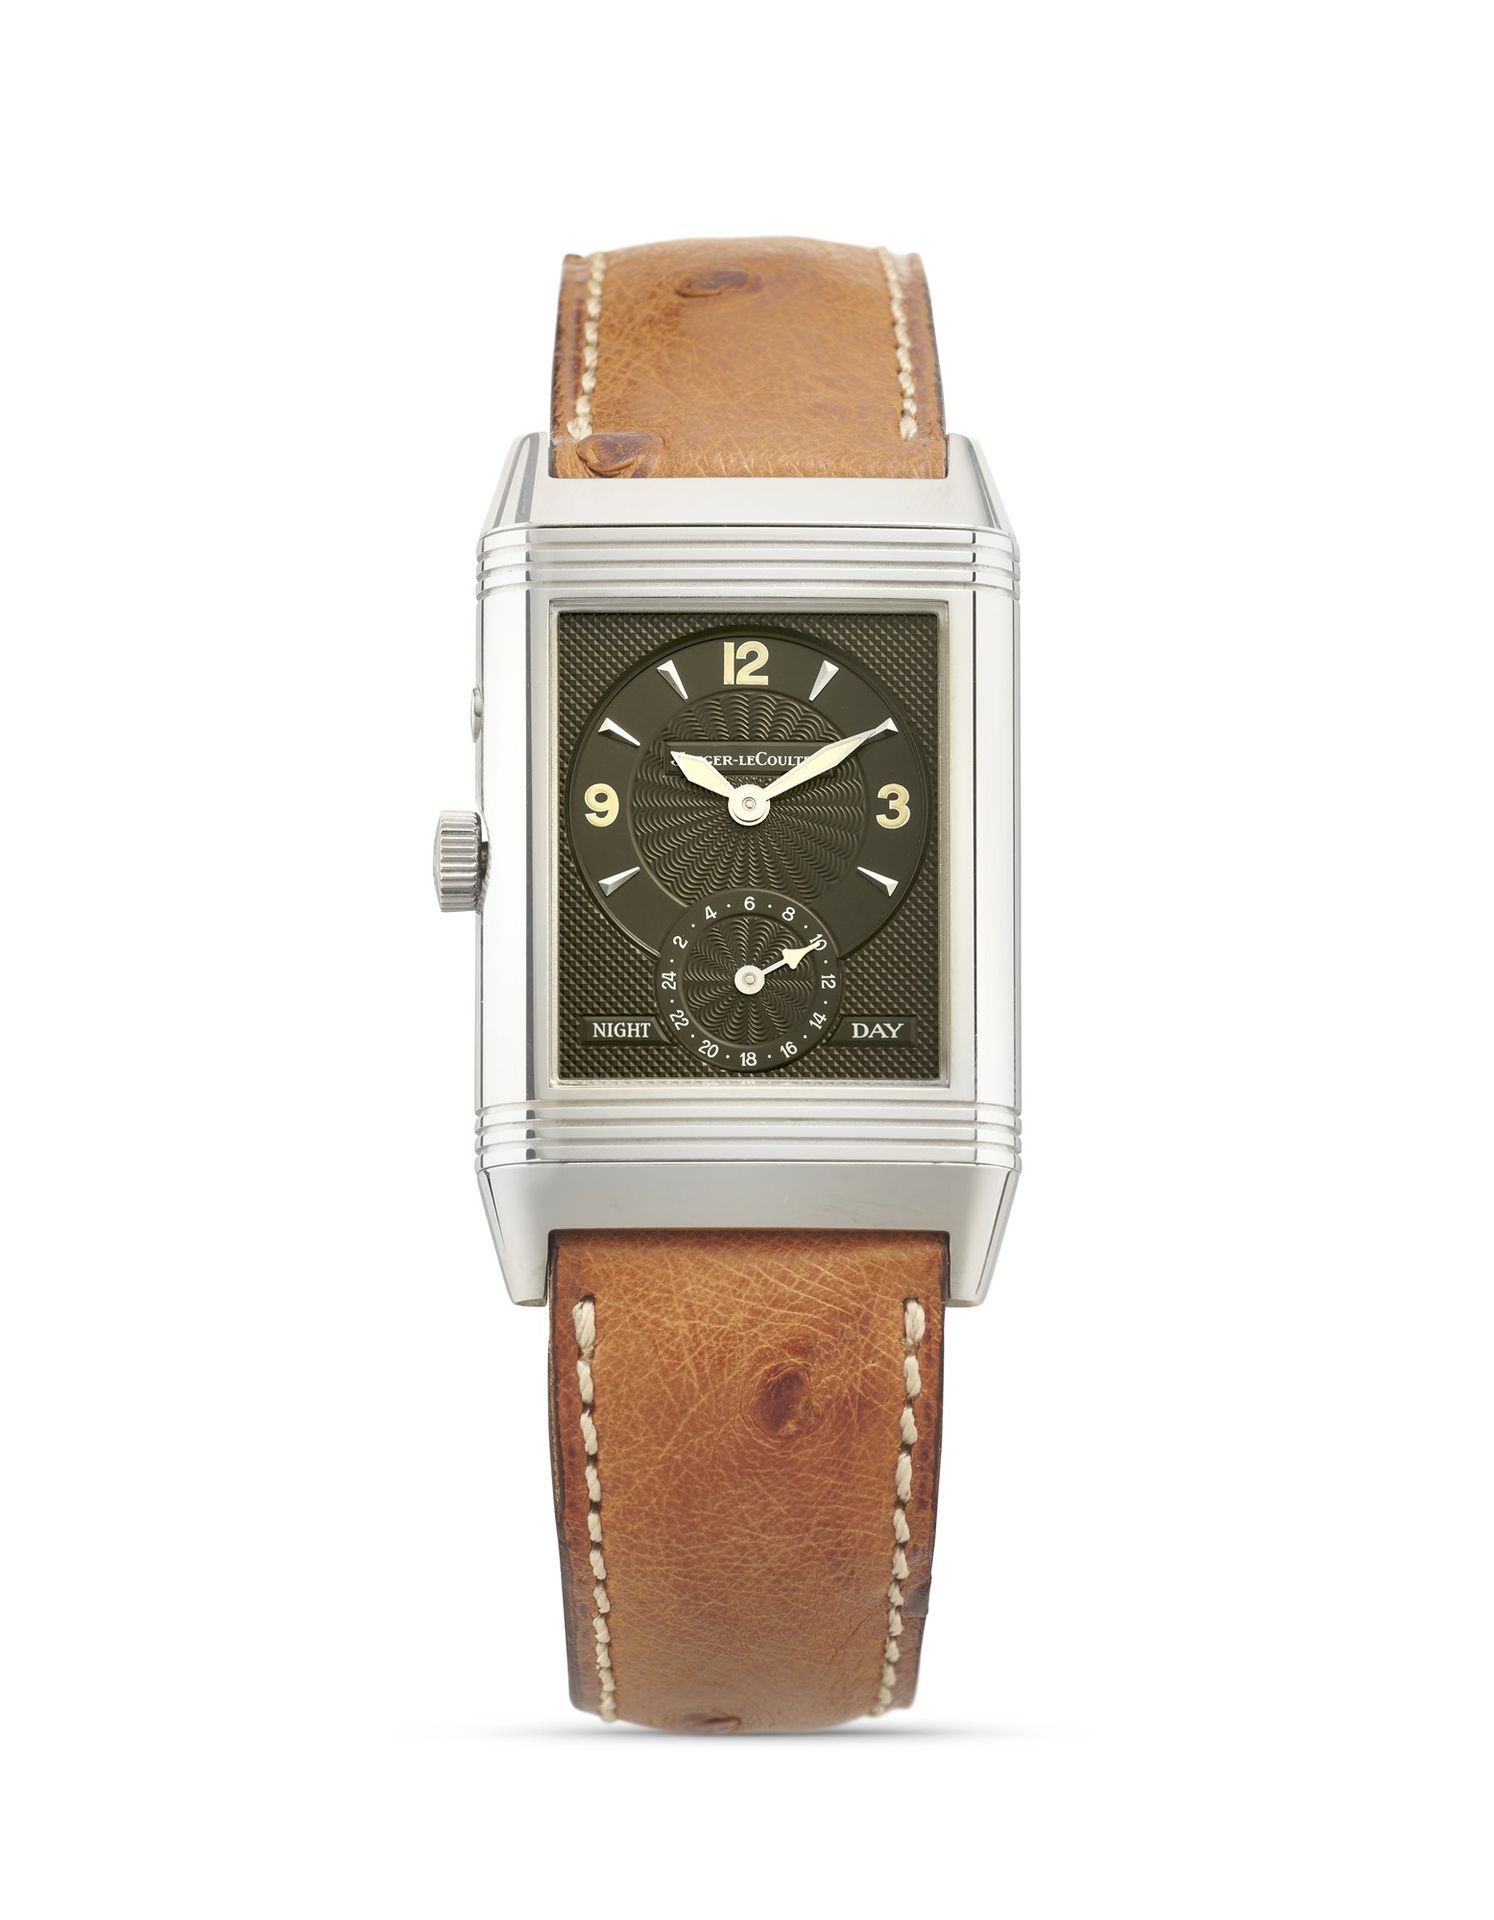 Jaeger-LeCoultre Jaeger-LeCoultre Reverso Duoface Night & Day 270854, Años 90

C&hellip;